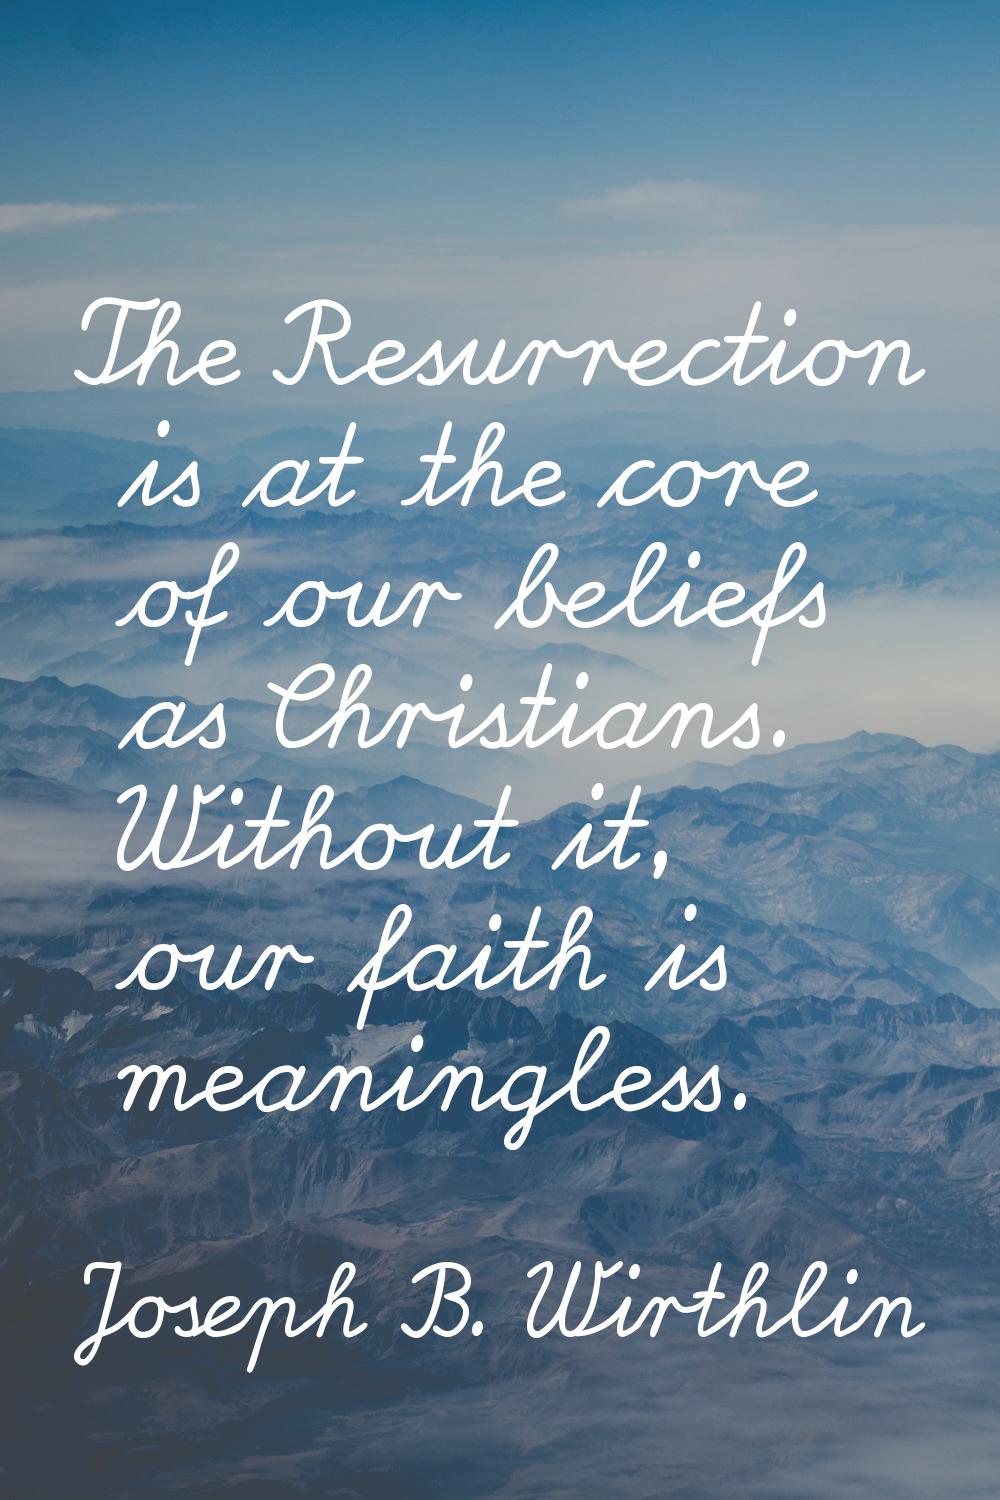 The Resurrection is at the core of our beliefs as Christians. Without it, our faith is meaningless.